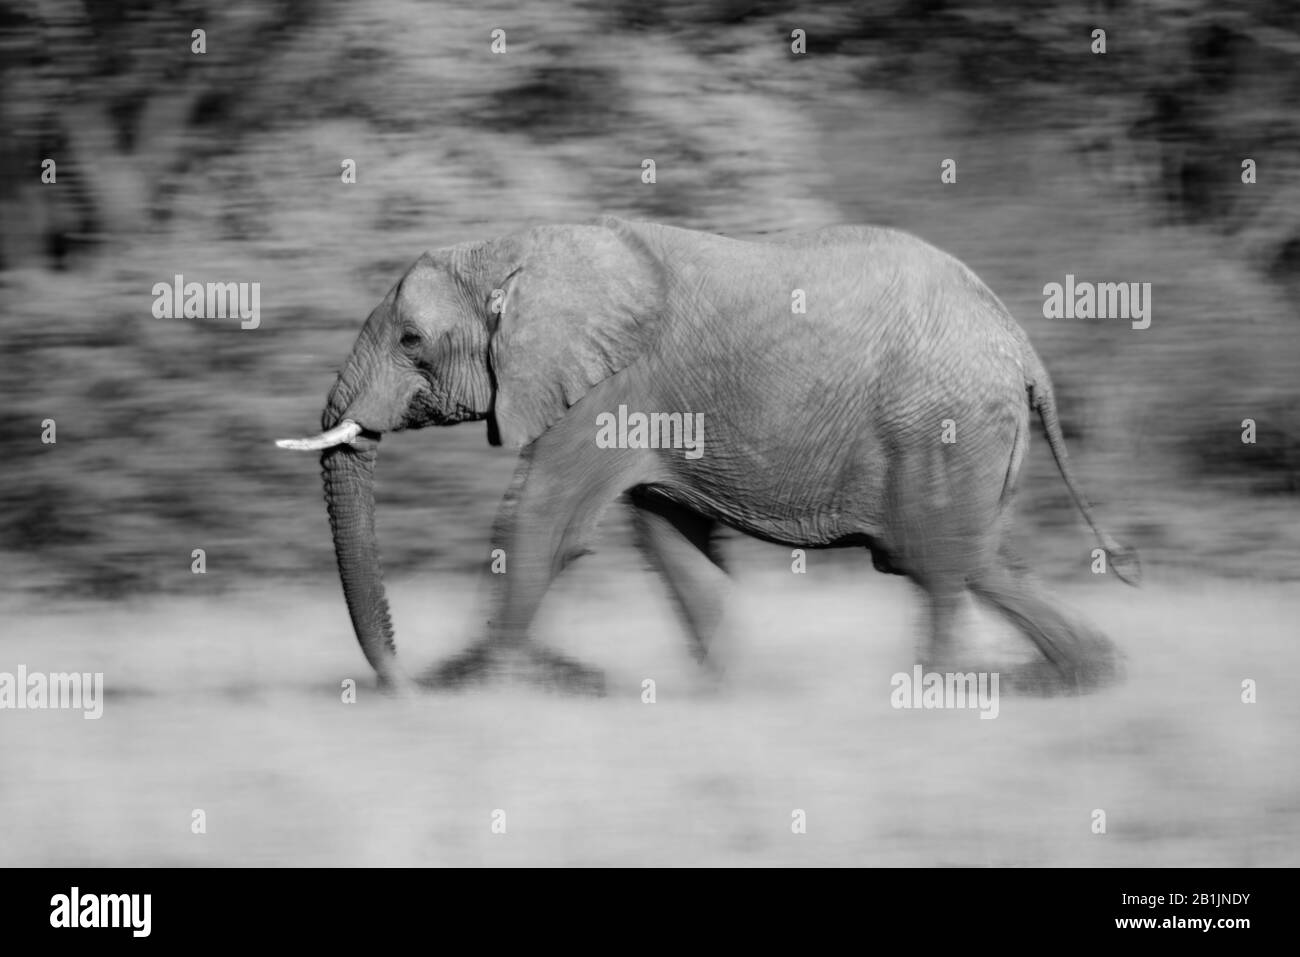 An elephant is walking past trees in the African savannah from left to right. The slow shutter speed blurs its legs and the background. Shot with a Ni Stock Photo